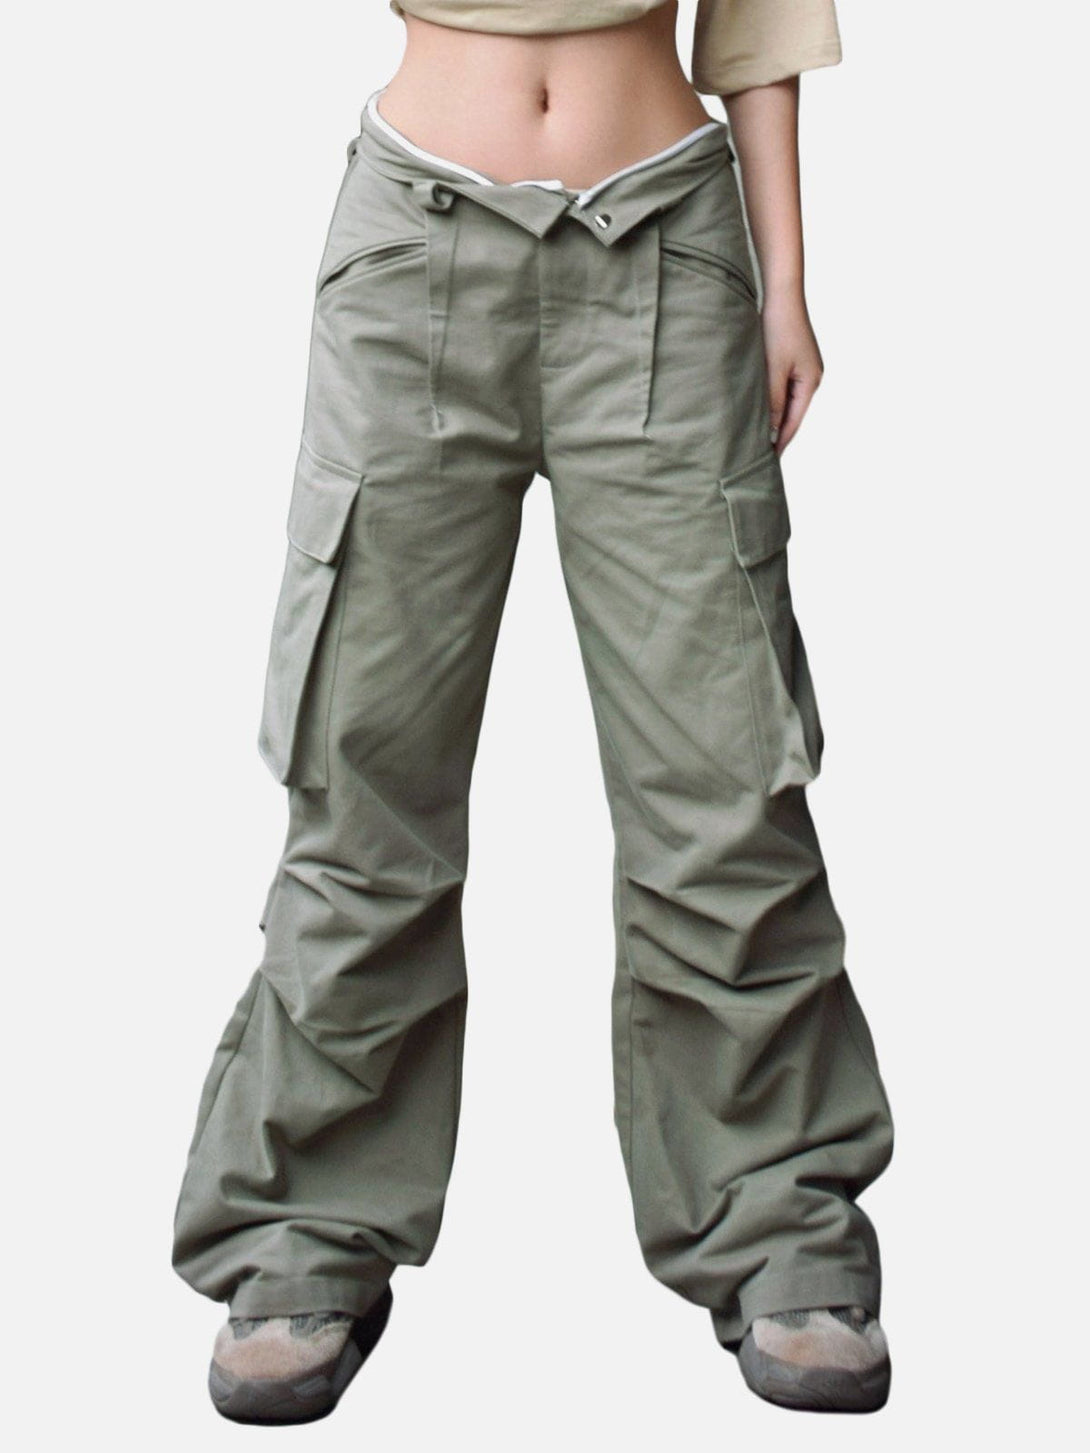 Majesda® - Solid Large Pocket Cargo Pants outfit ideas streetwear fashion